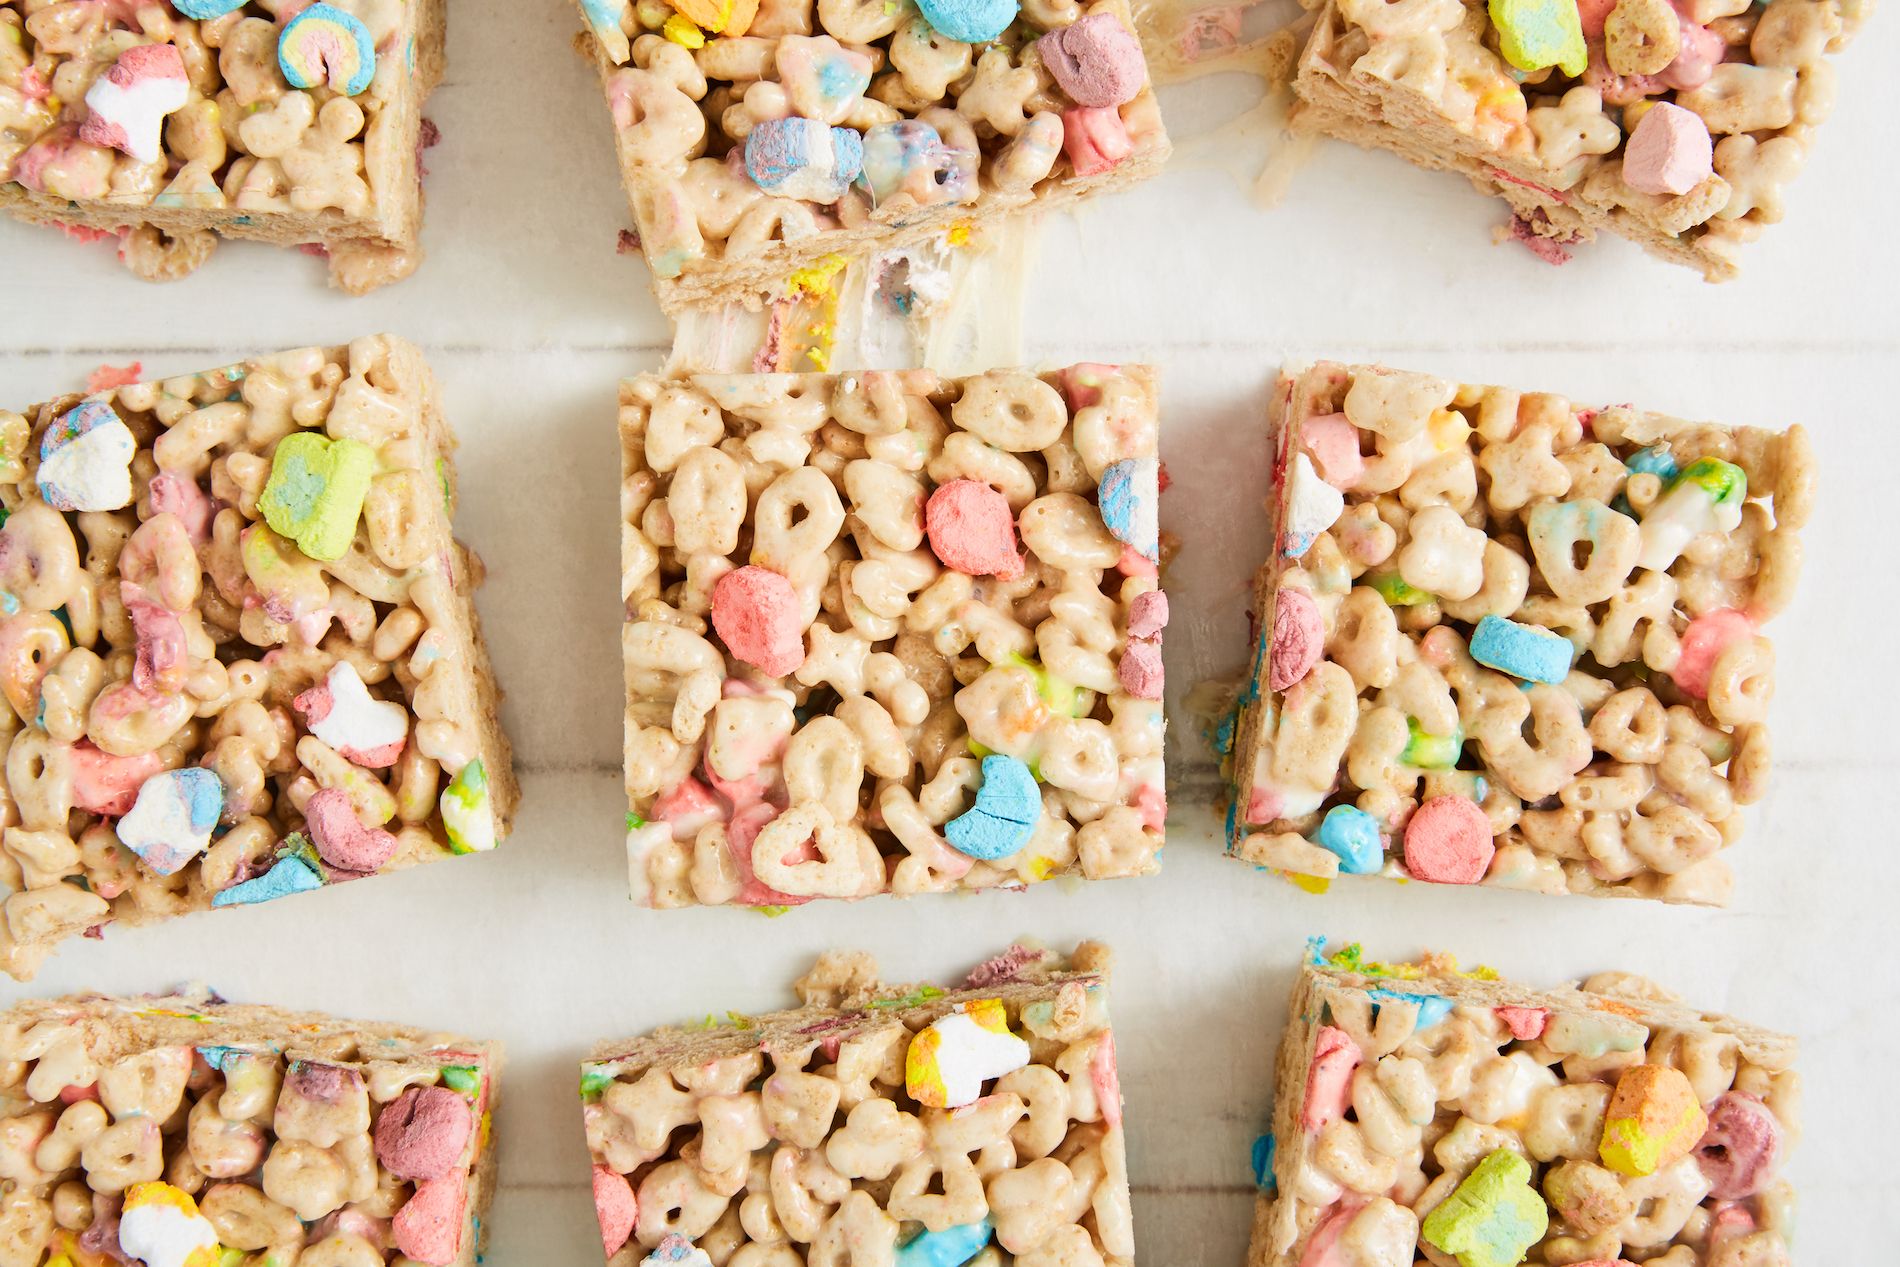 Best Charms Treats Recipe - How Make Lucky Charms Treats